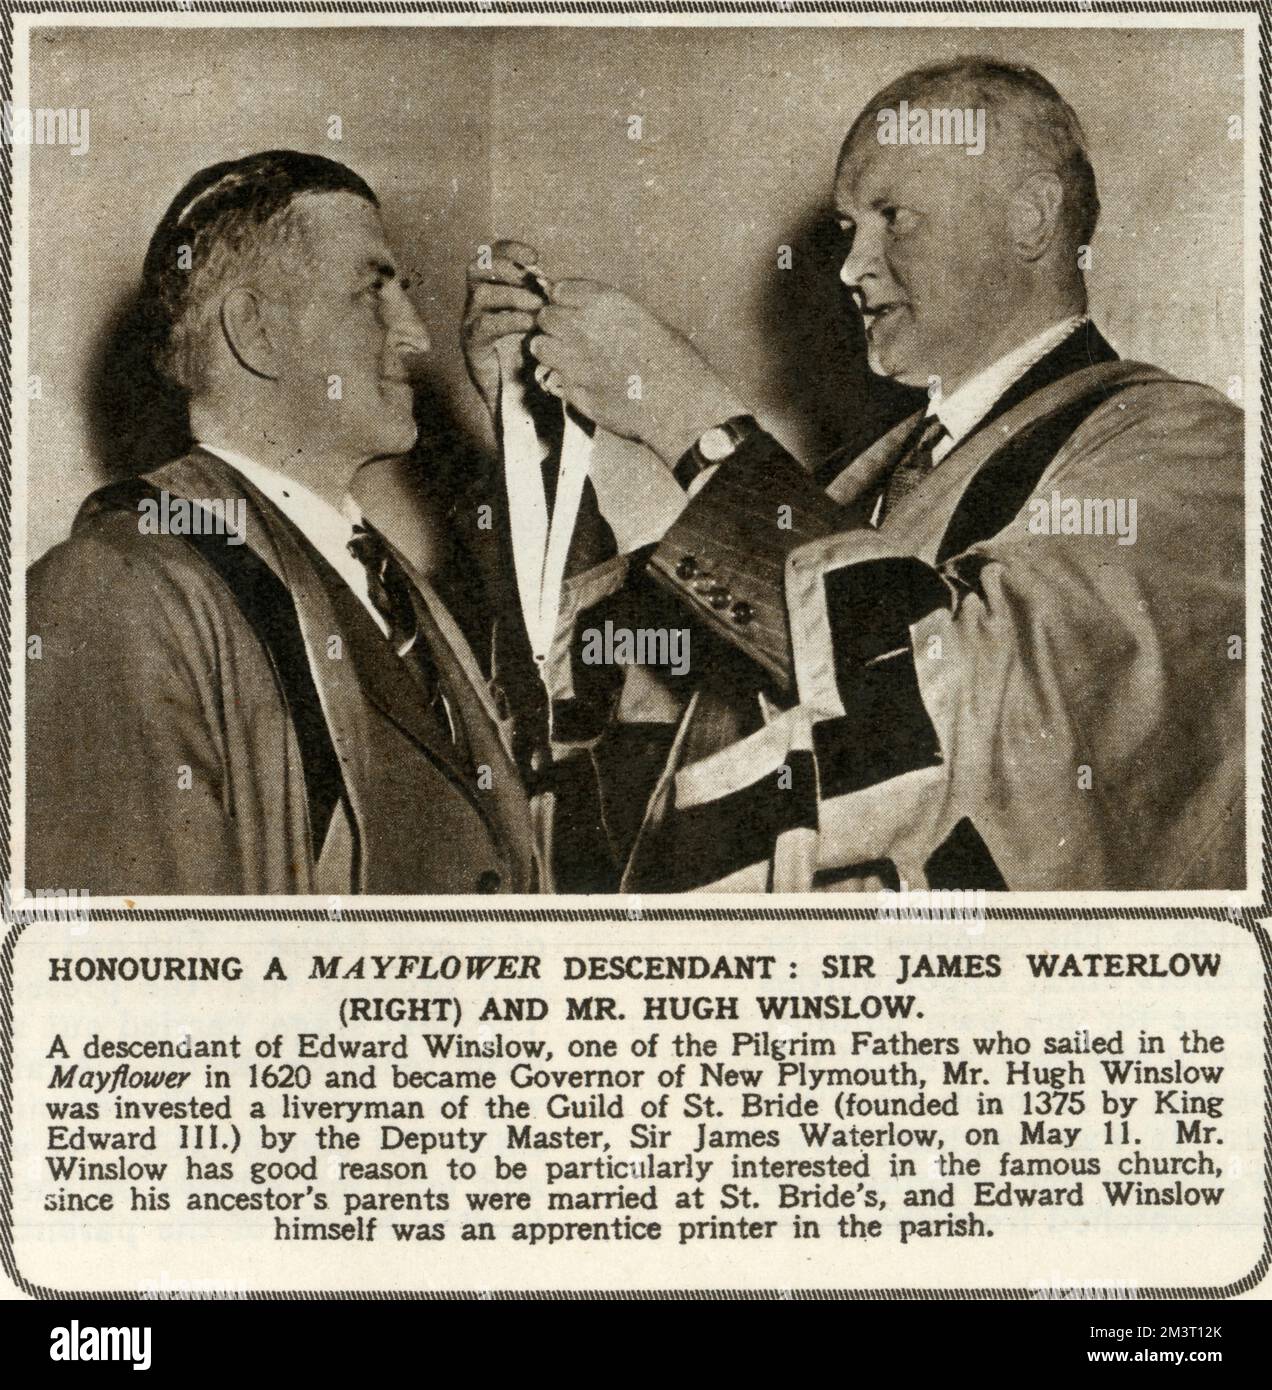 Honouring a Mayflower descendant - Sir James Waterlow (right) and Mr. Hugh Winslow. Hugh Winslow was a descendant of Edward Winslow, one of the Pilgrim Fathers who sailed in the Mayflower in 1620 and became Governor of New Plymouth. Stock Photo